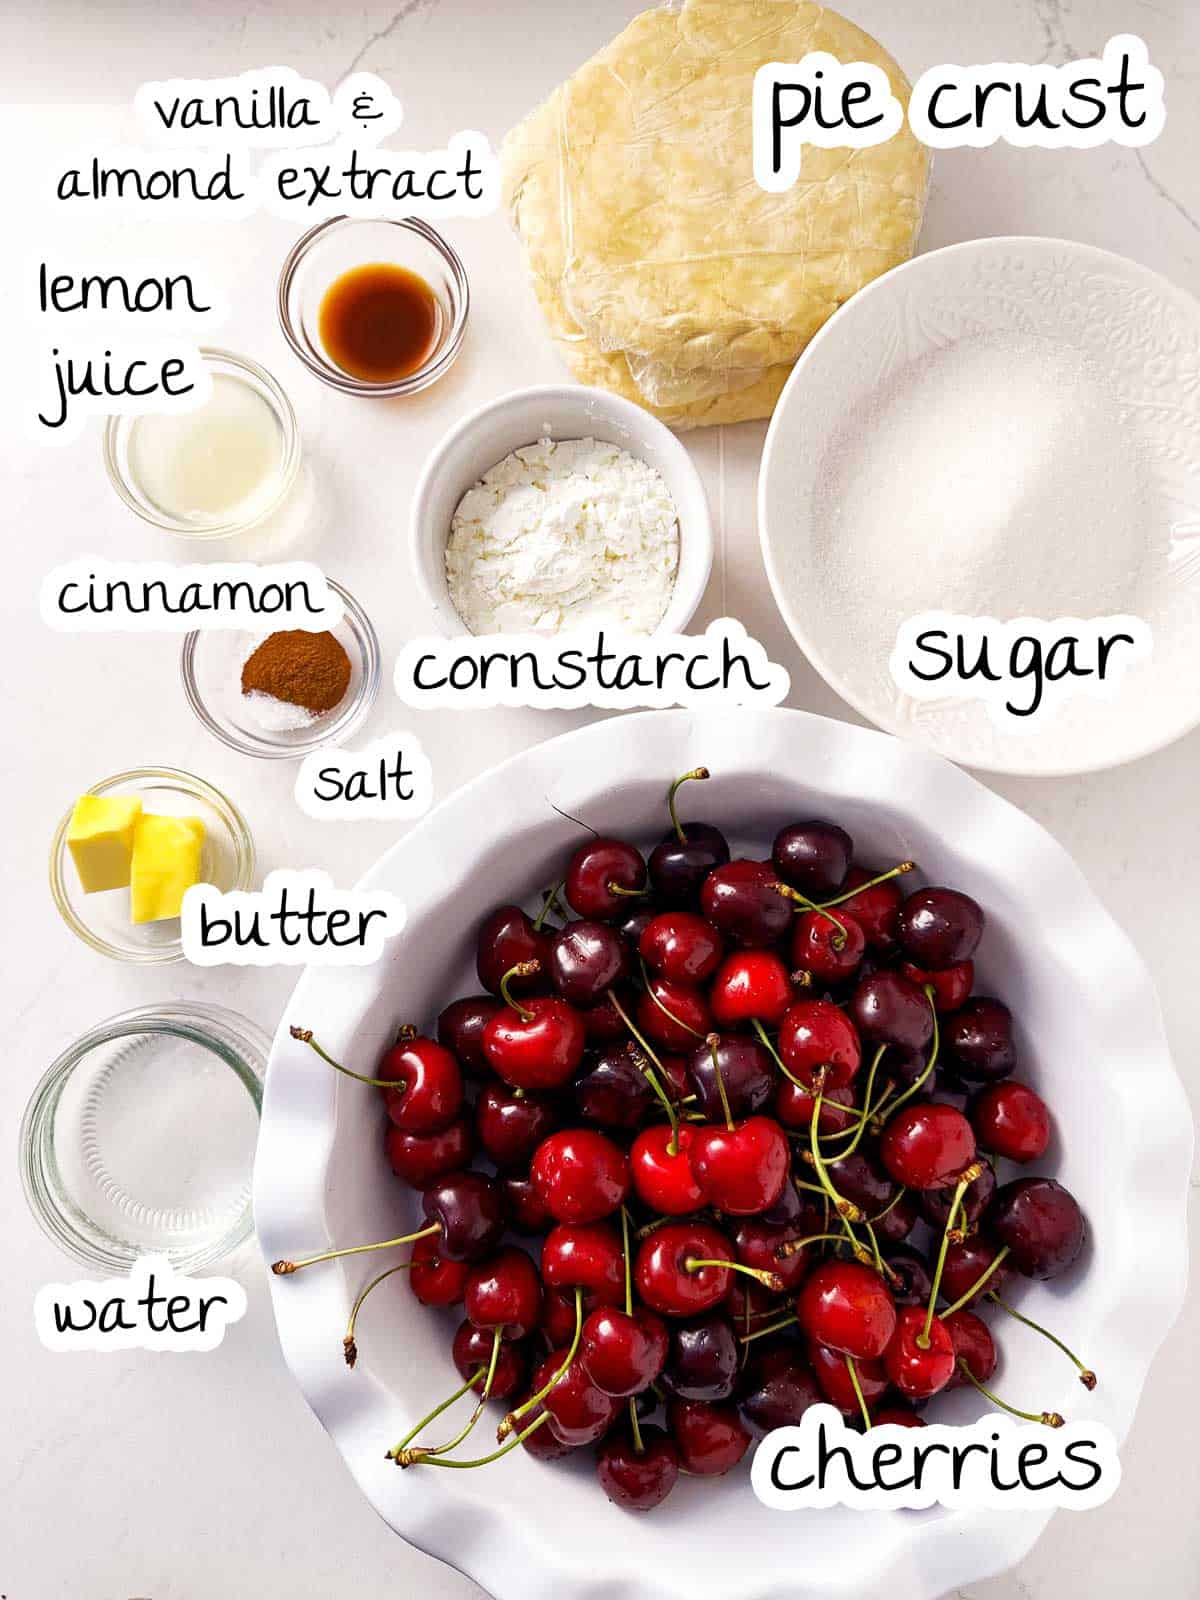 ingredients for cherry pie with text labels